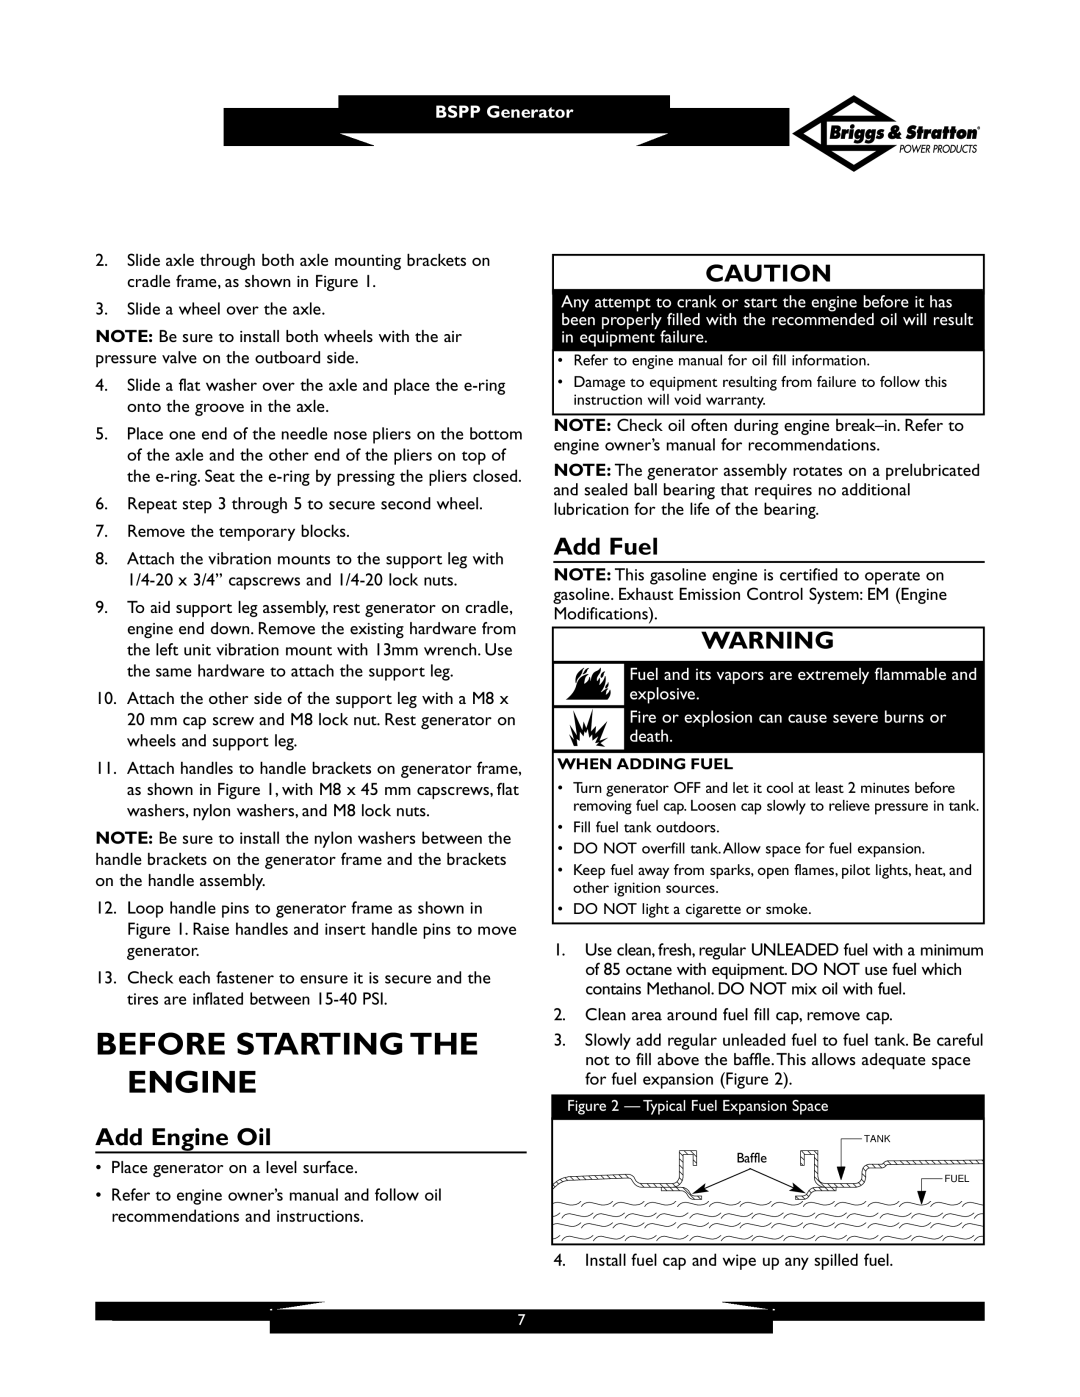 Briggs & Stratton PRO6500 owner manual Before Starting the Engine, Add Fuel, Add Engine Oil, When Adding Fuel 